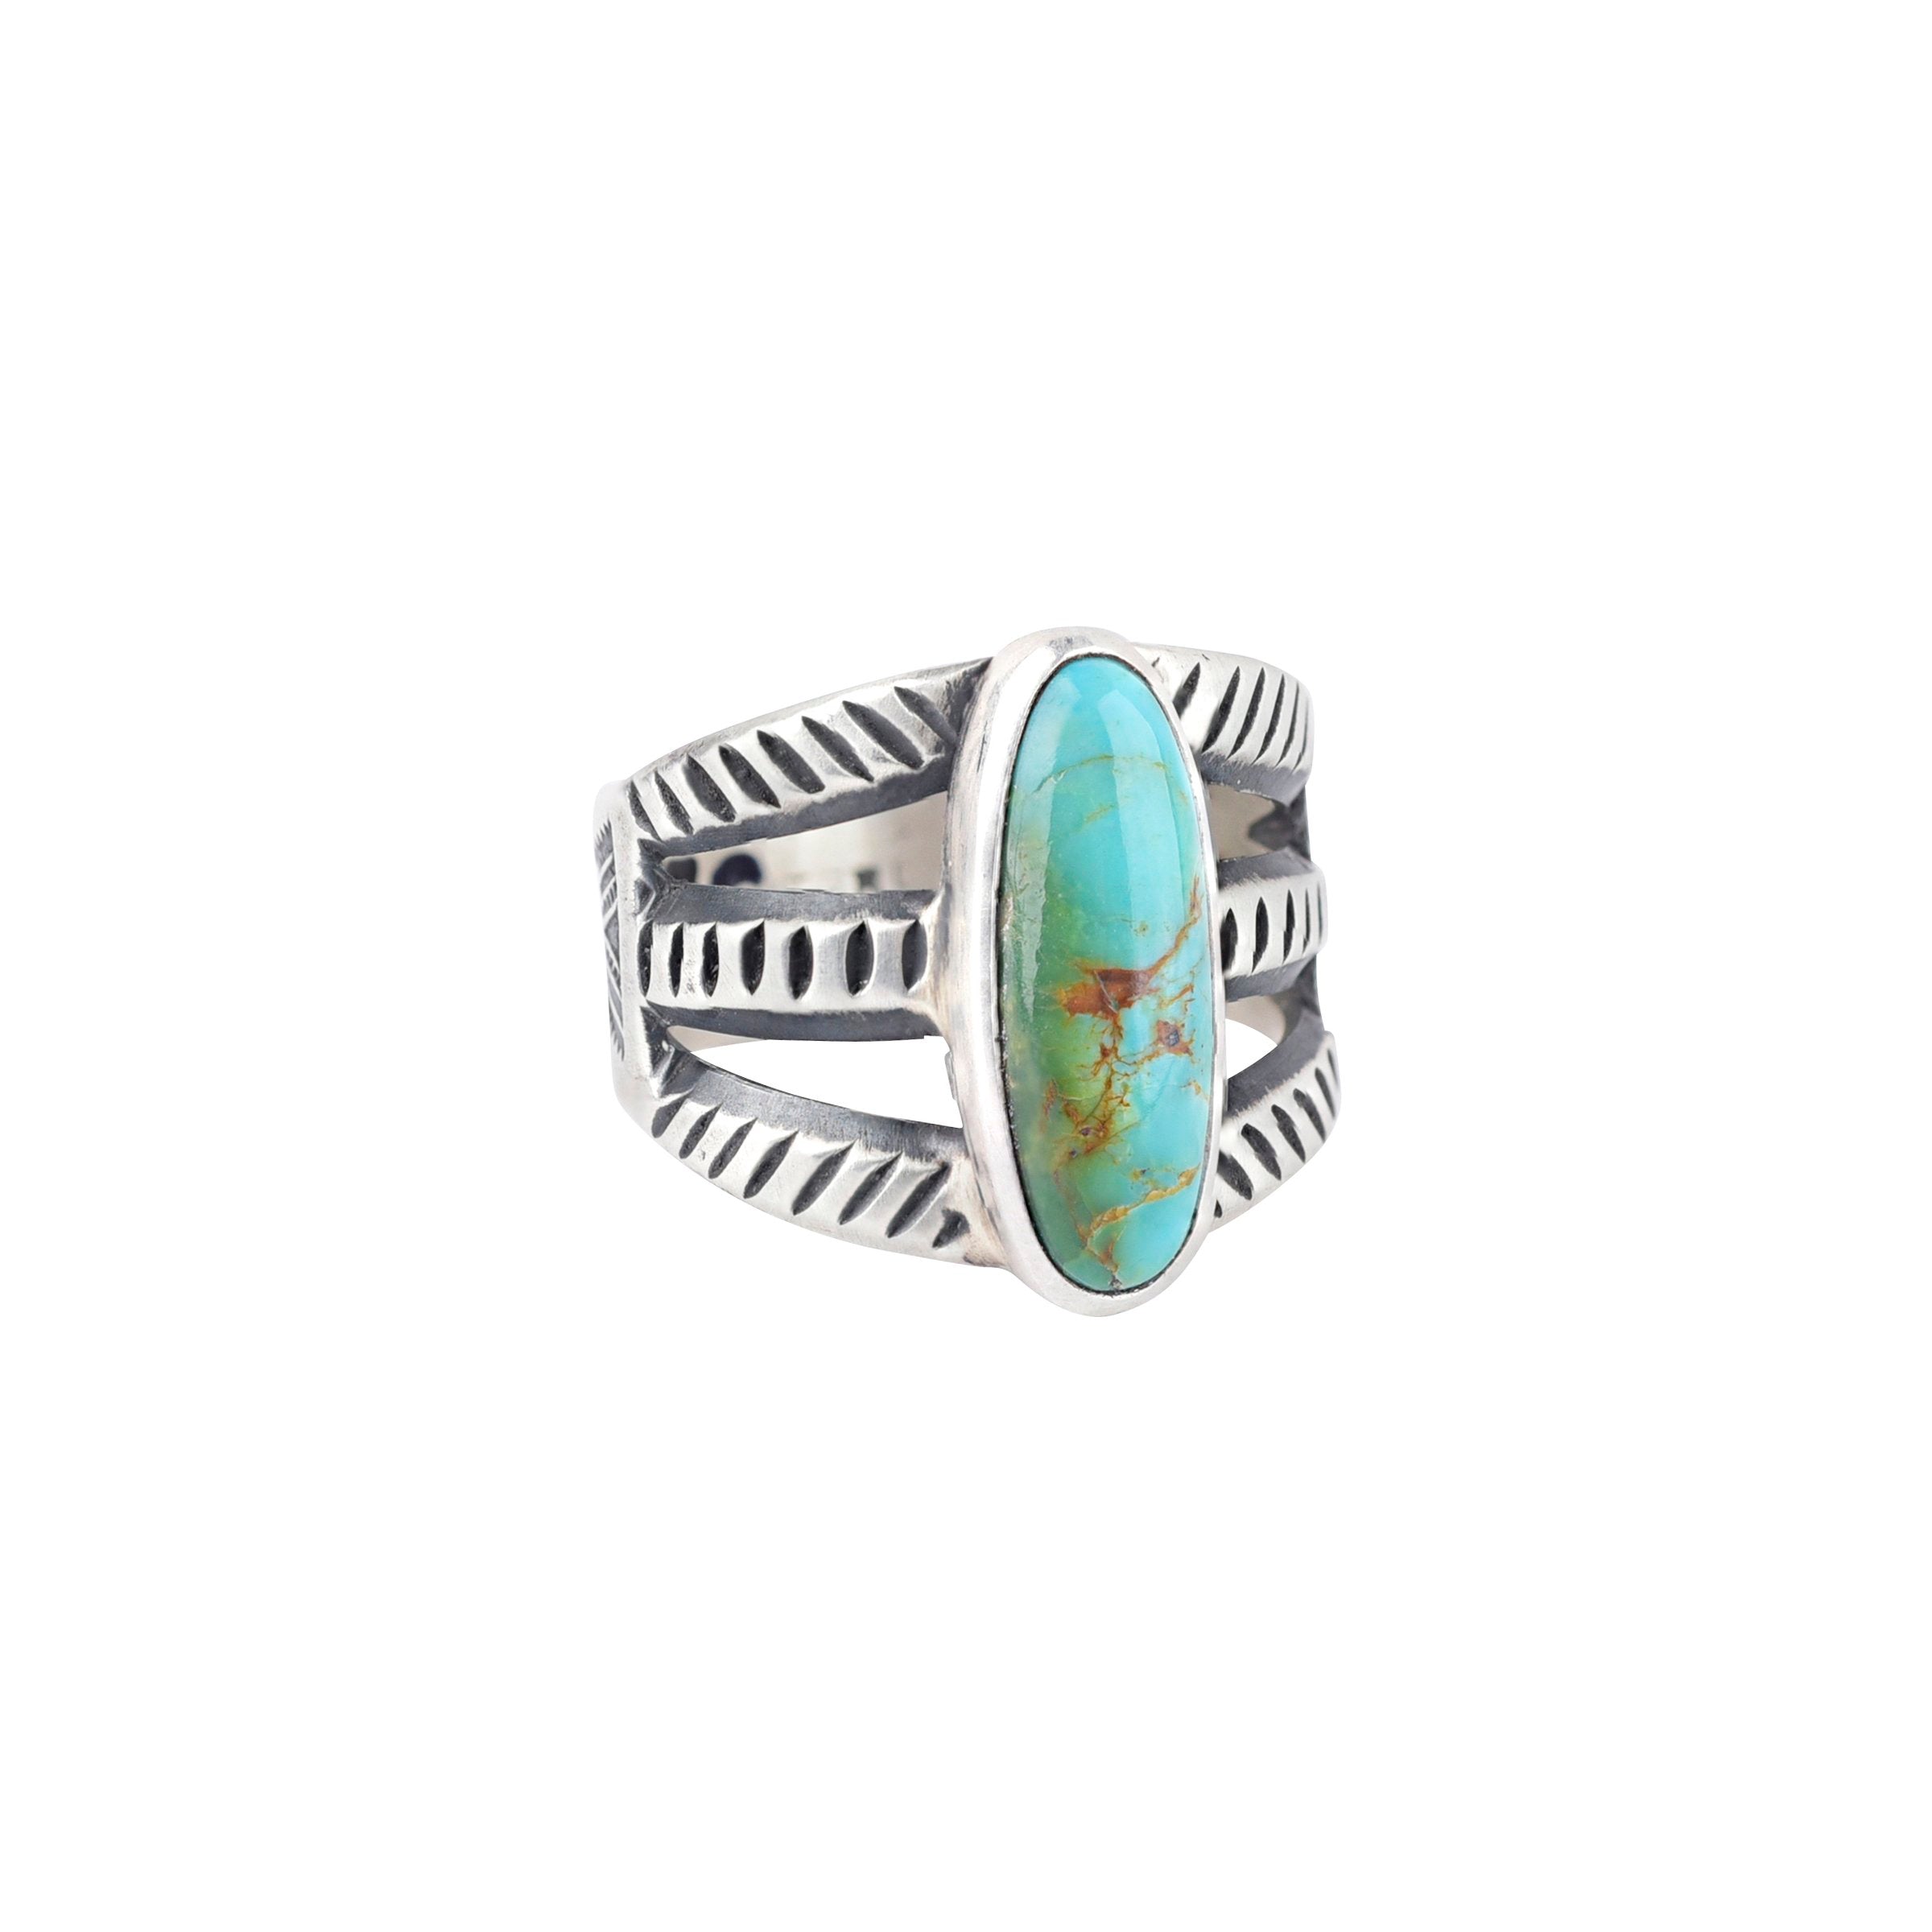 Alex Horst Turquoise Stamp Ring - Size 8